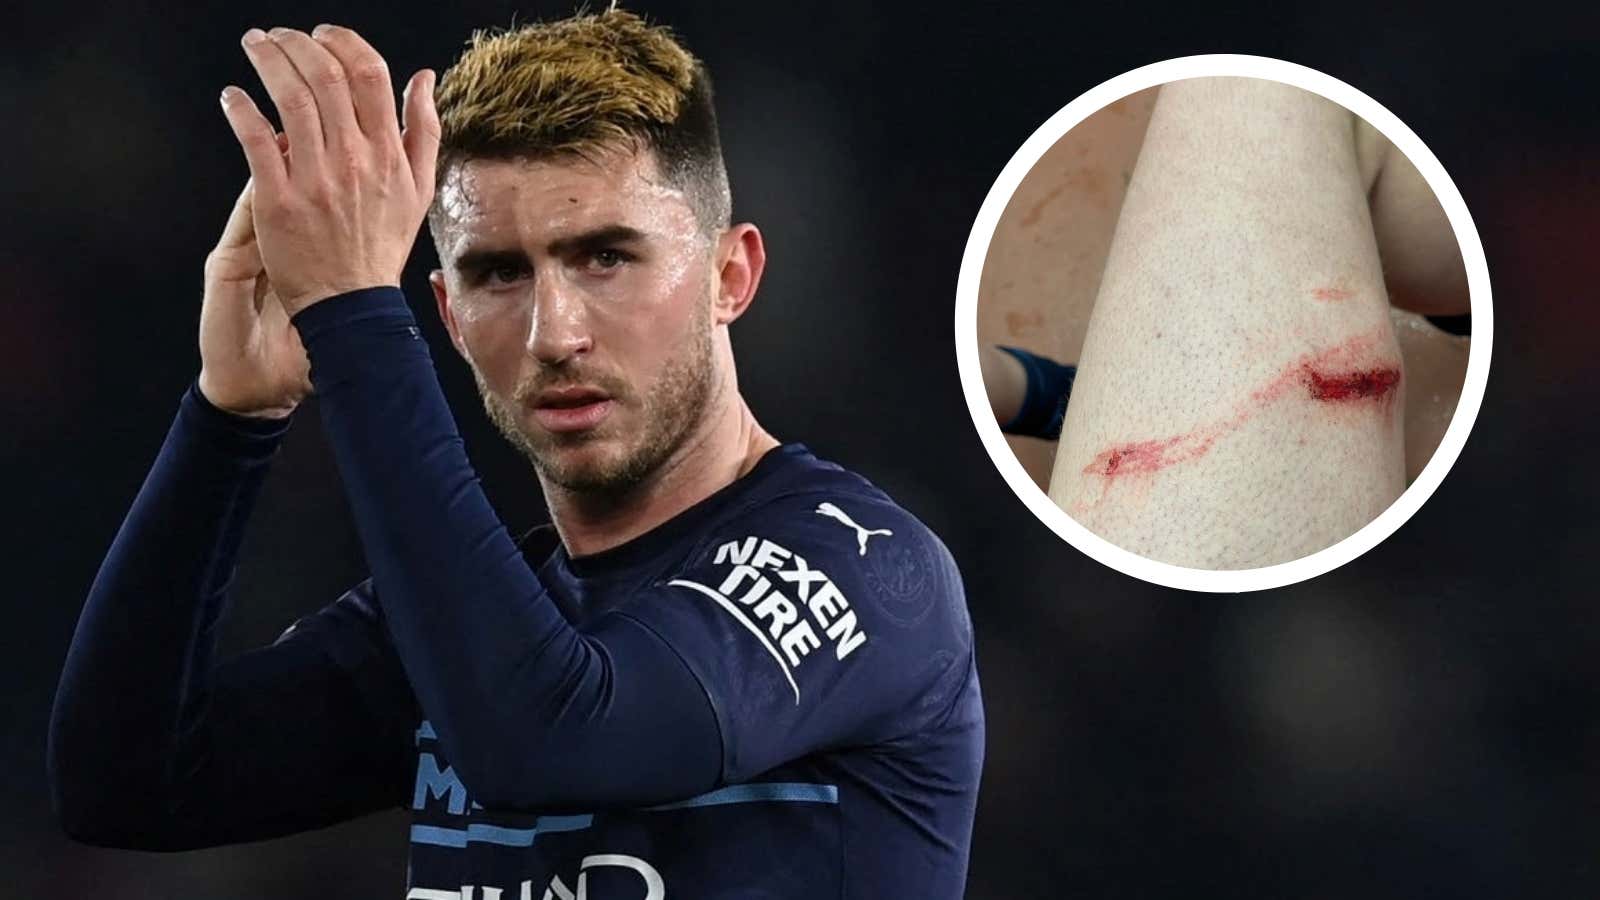 Aymeric Laporte and his wound